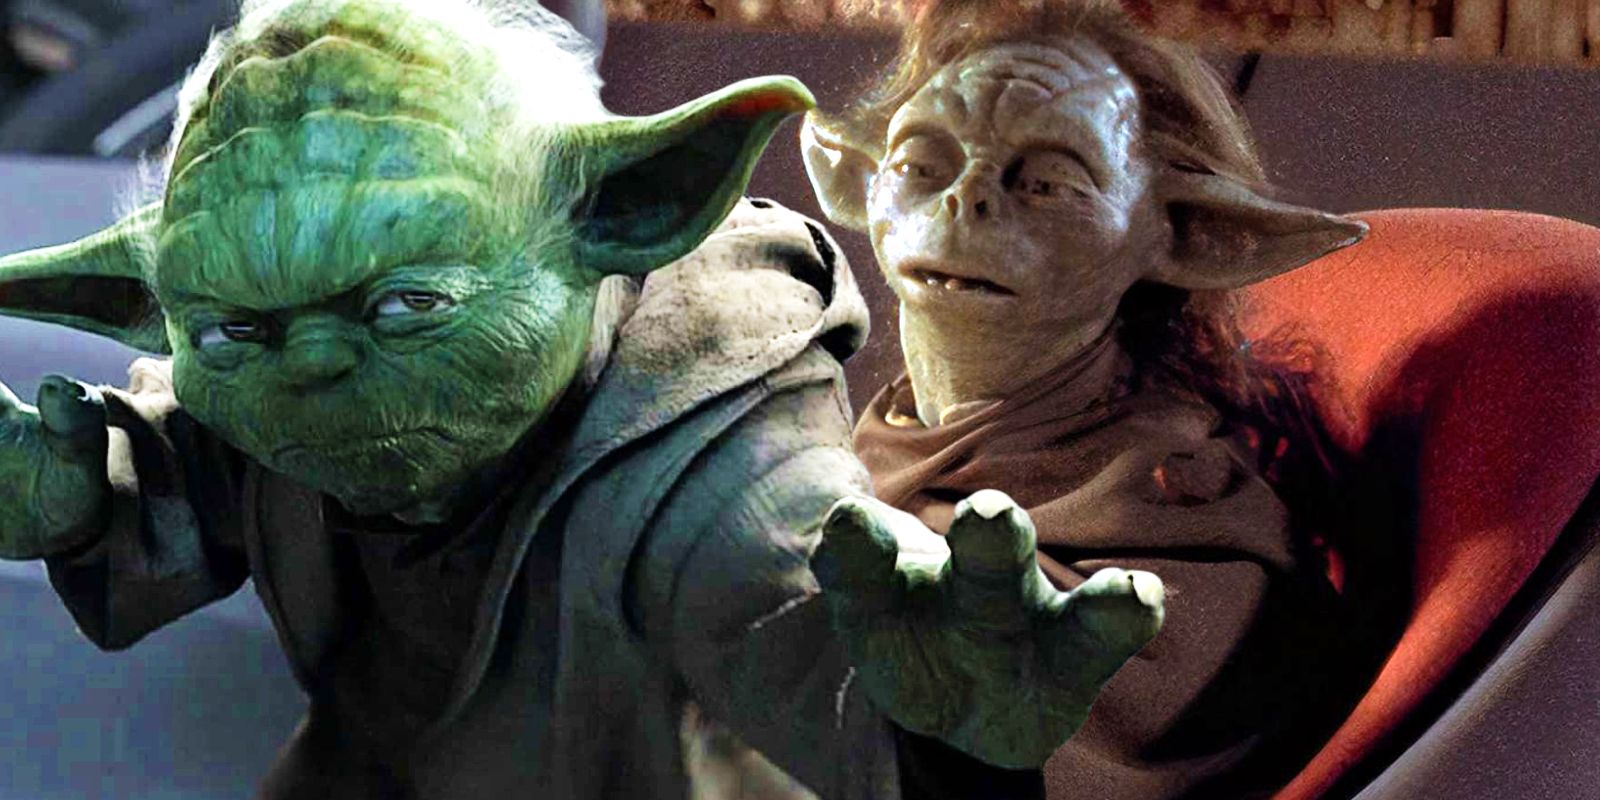 Master Yoda and Master Yaddle in the Star Wars prequels